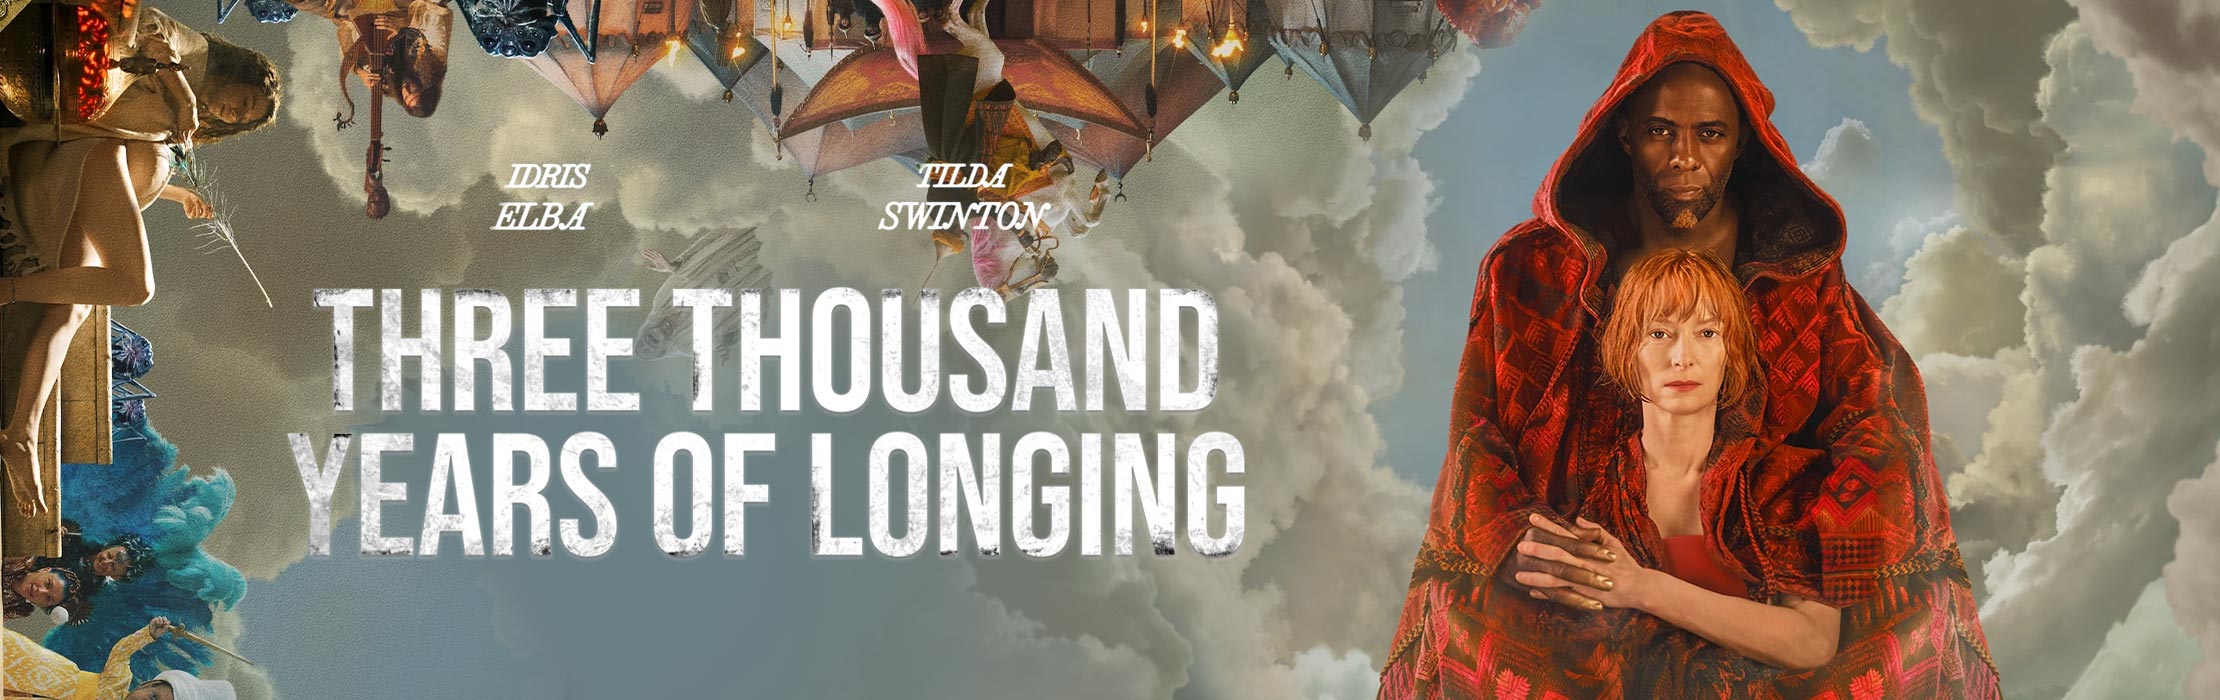 Three Thousand Years Of Longing Film Info and Screening Times The